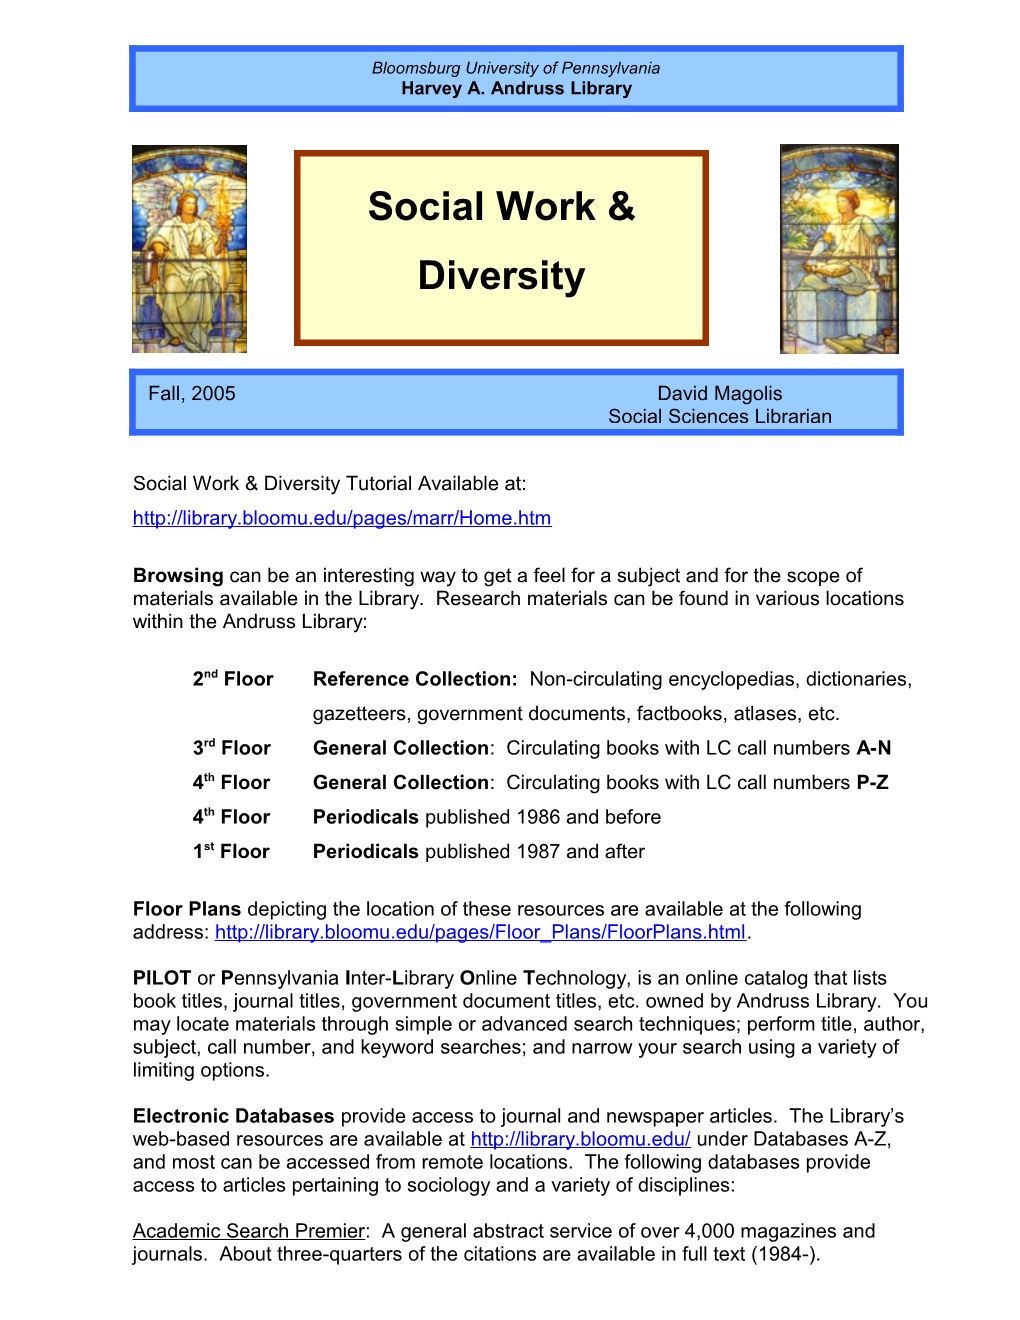 Social Work & Diversity Tutorial Available At